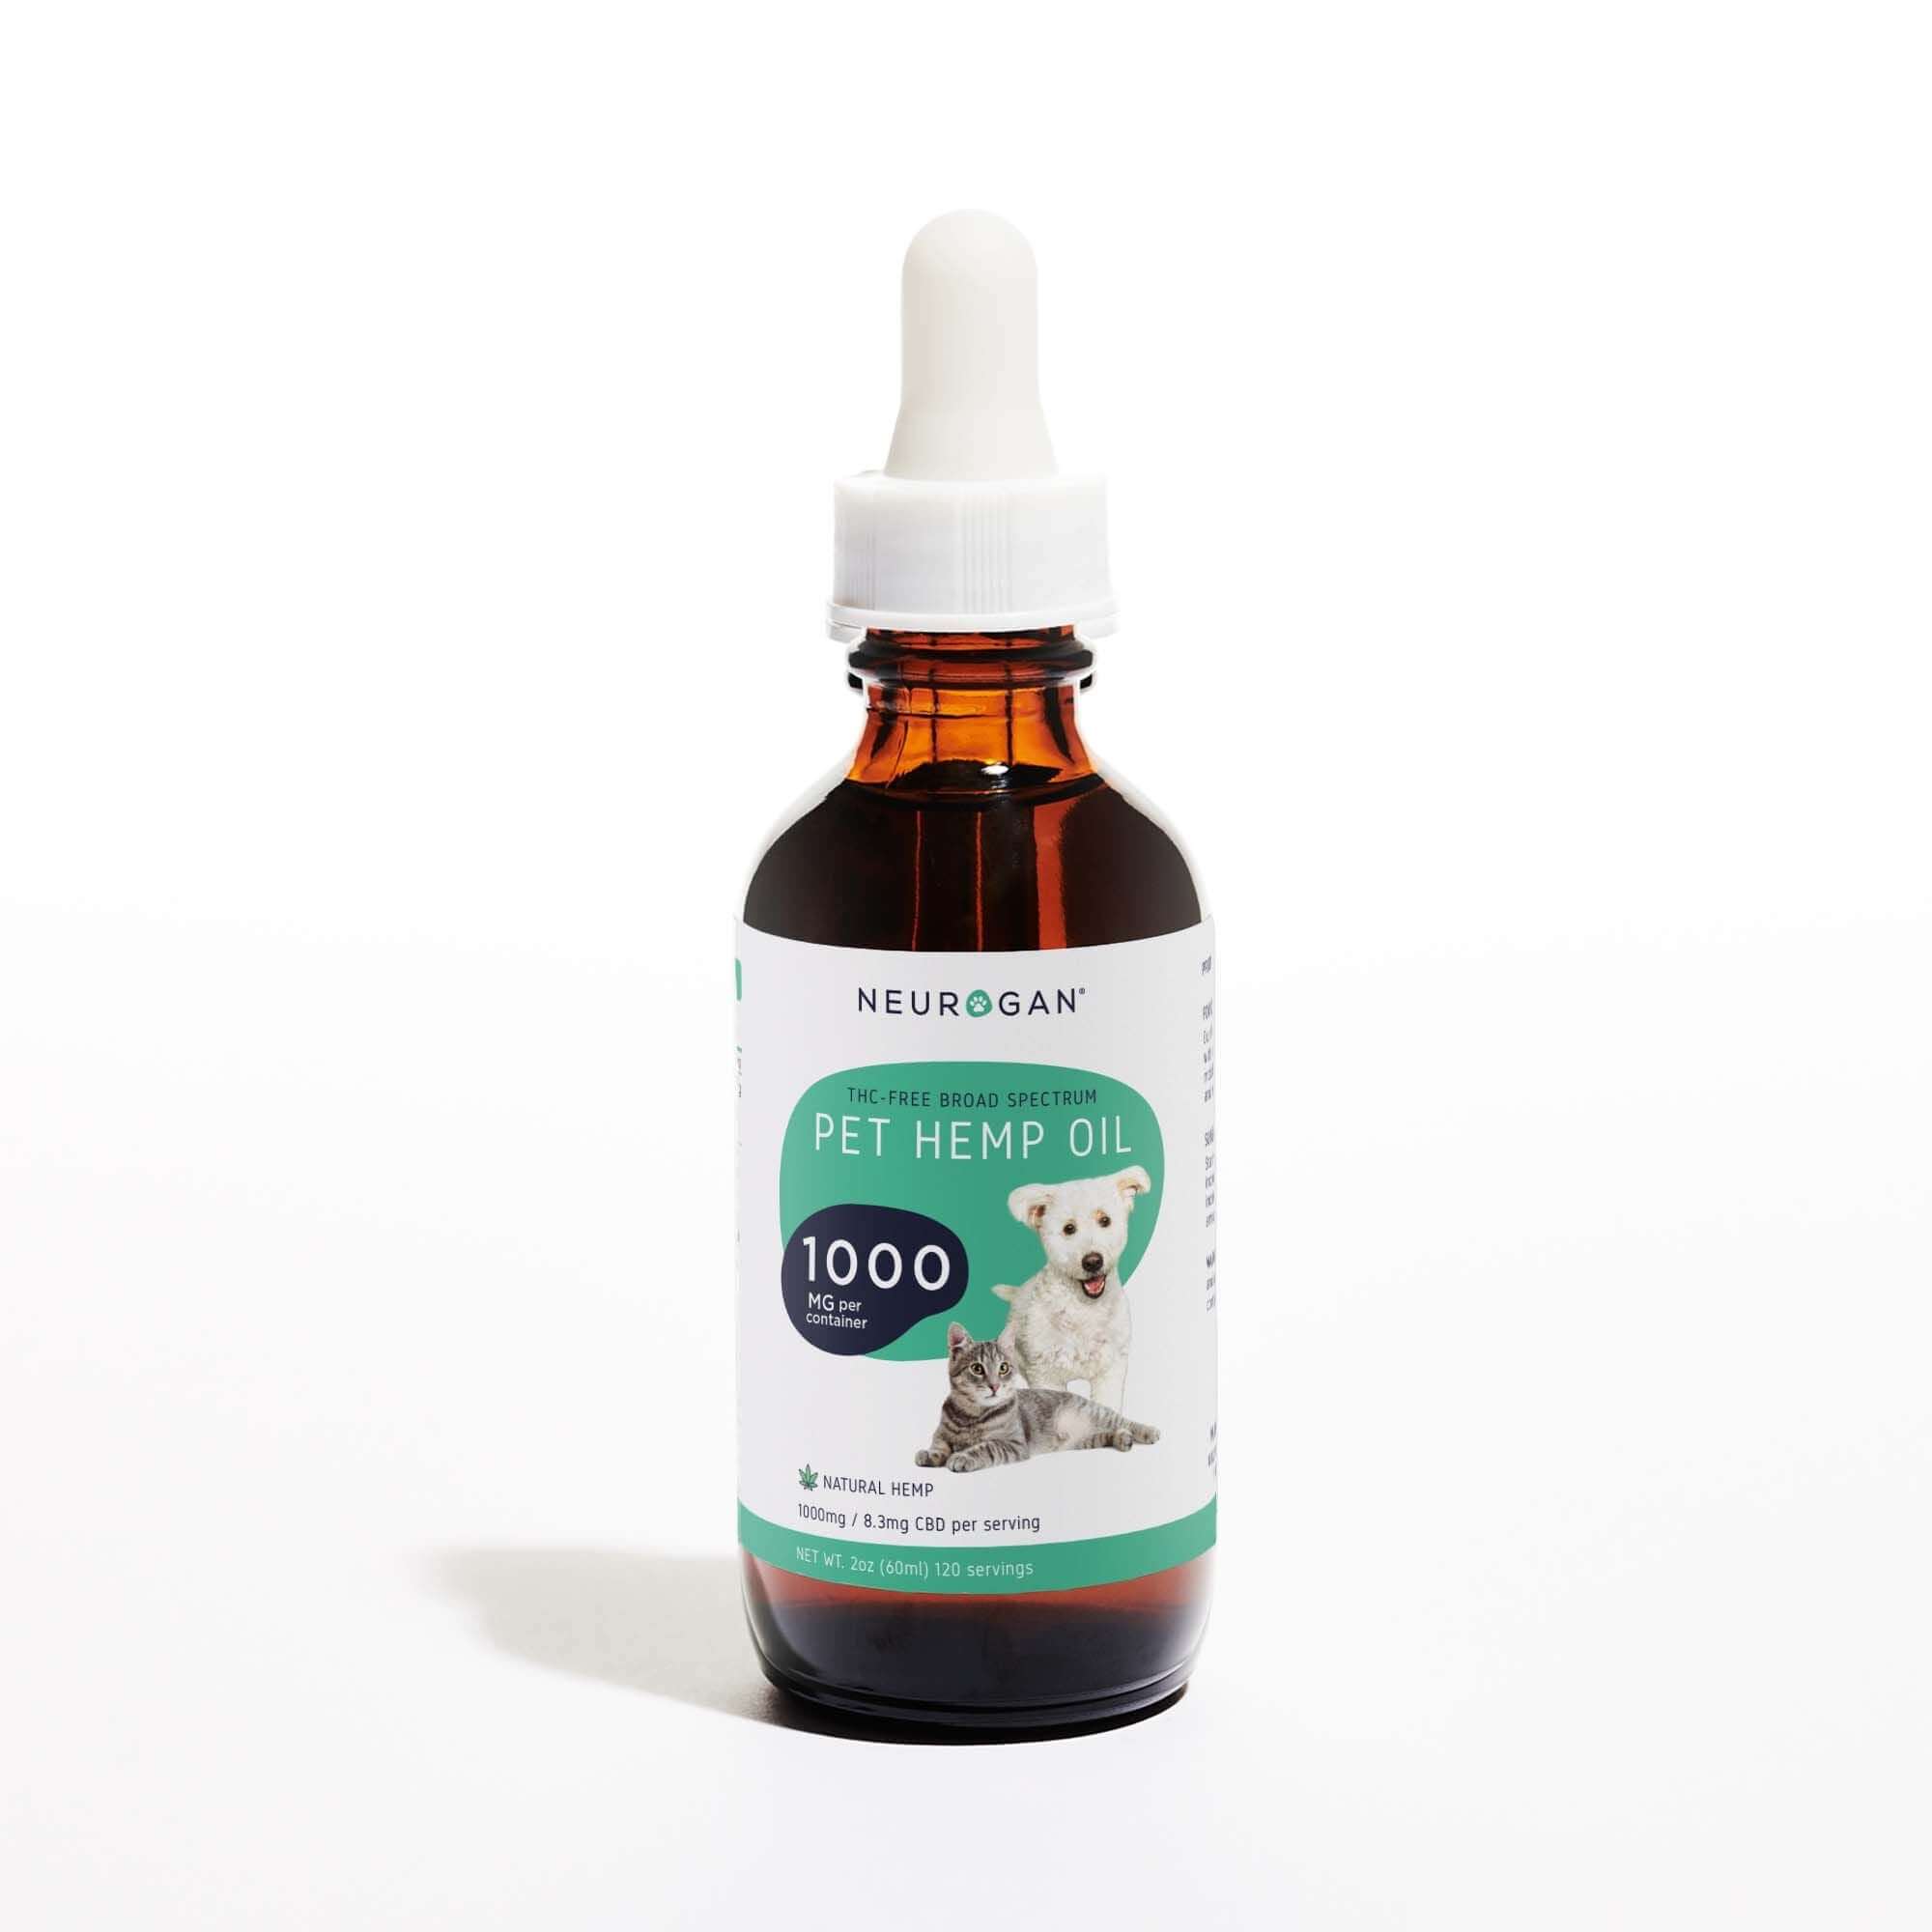 Neurogan Full Spectrum CBD Pet Oil 1000MG with an image of a dog and cat on label